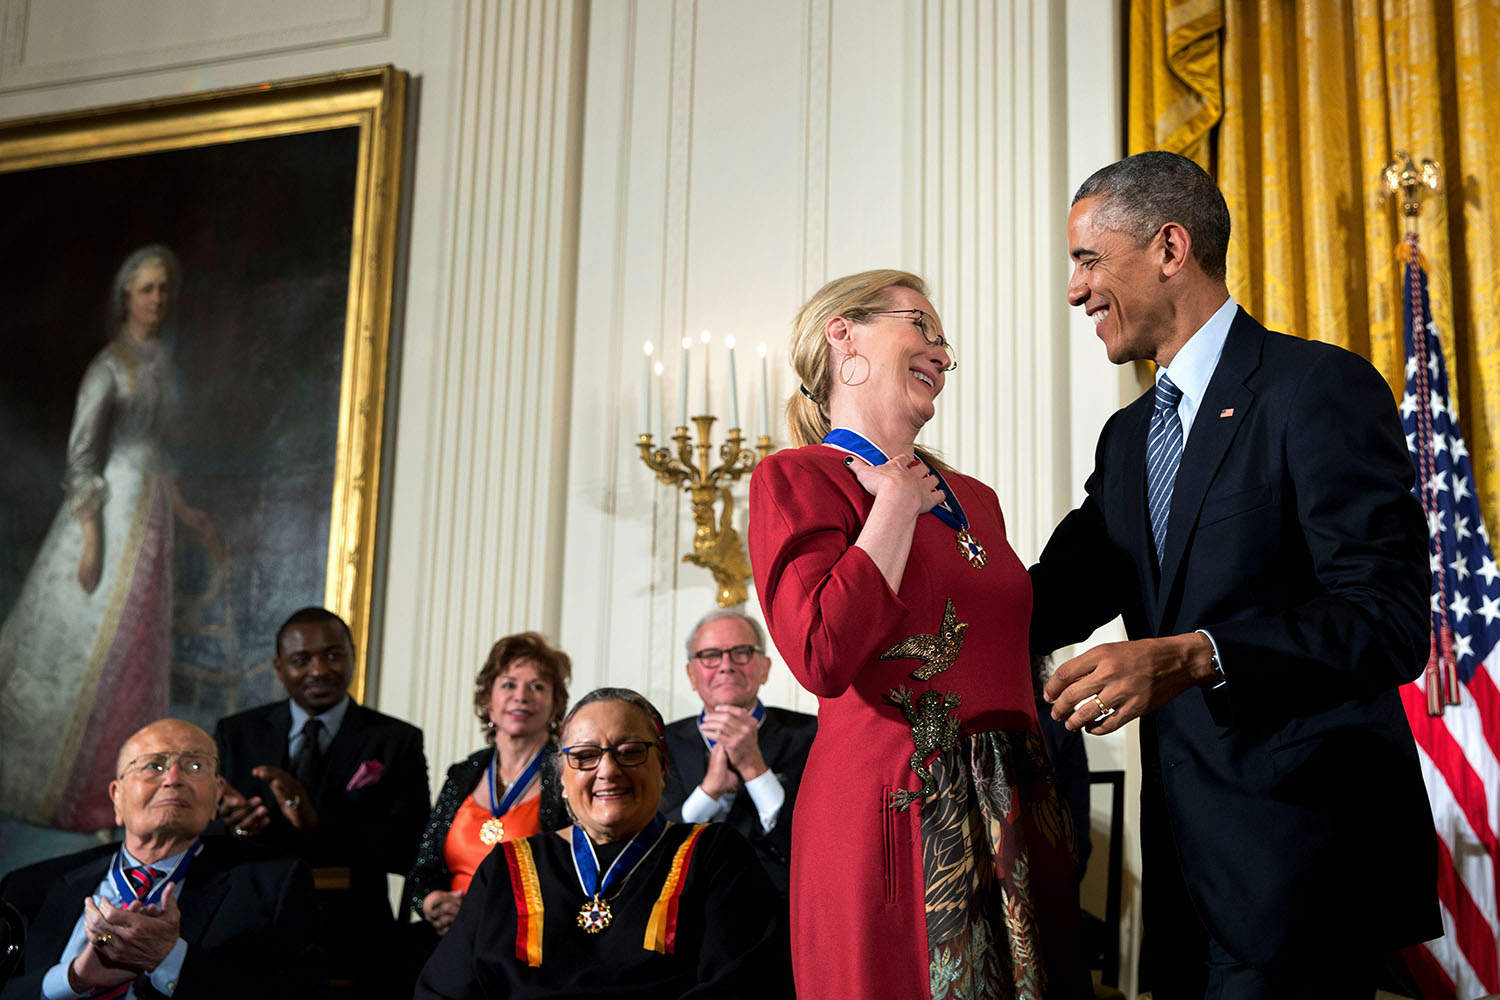 President Barack Obama presents the Presidential Medal of Freedom to actress Meryl Streep during a ceremony in the East Room of the White House, Nov. 24, 2014. (Official White House Photo by Pete Souza)

This official White House photograph is being made available only for publication by news organizations and/or for personal use printing by the subject(s) of the photograph. The photograph may not be manipulated in any way and may not be used in commercial or political materials, advertisements, emails, products, promotions that in any way suggests approval or endorsement of the President, the First Family, or the White House.